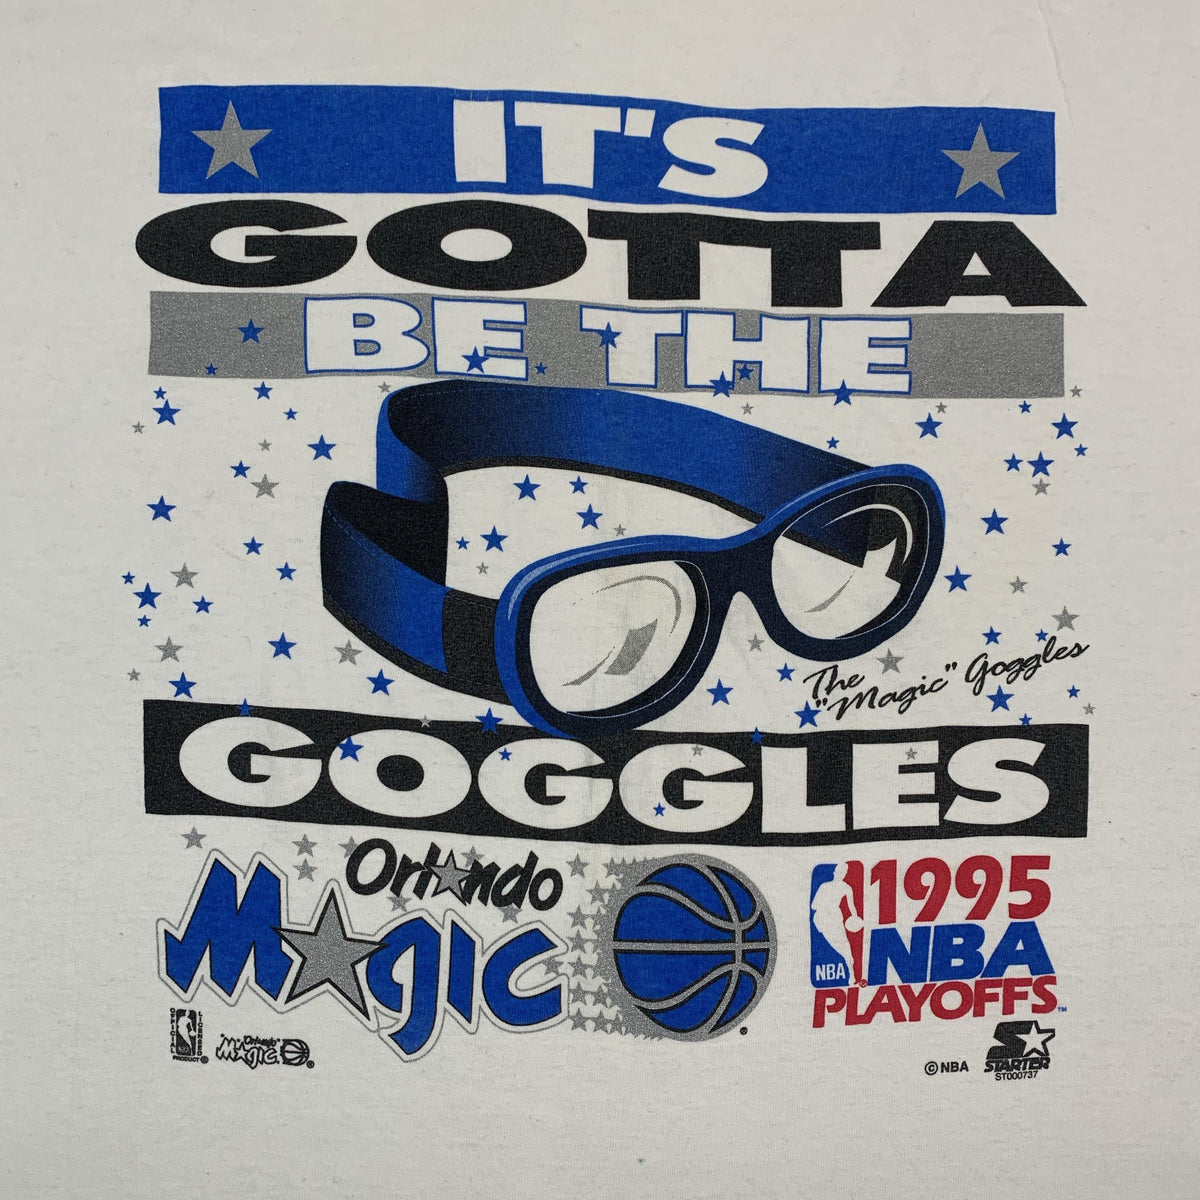 Vintage Orlando Magic &quot;It’s Gotta Be The Goggles&quot; Starter T-Shirt - jointcustodydc